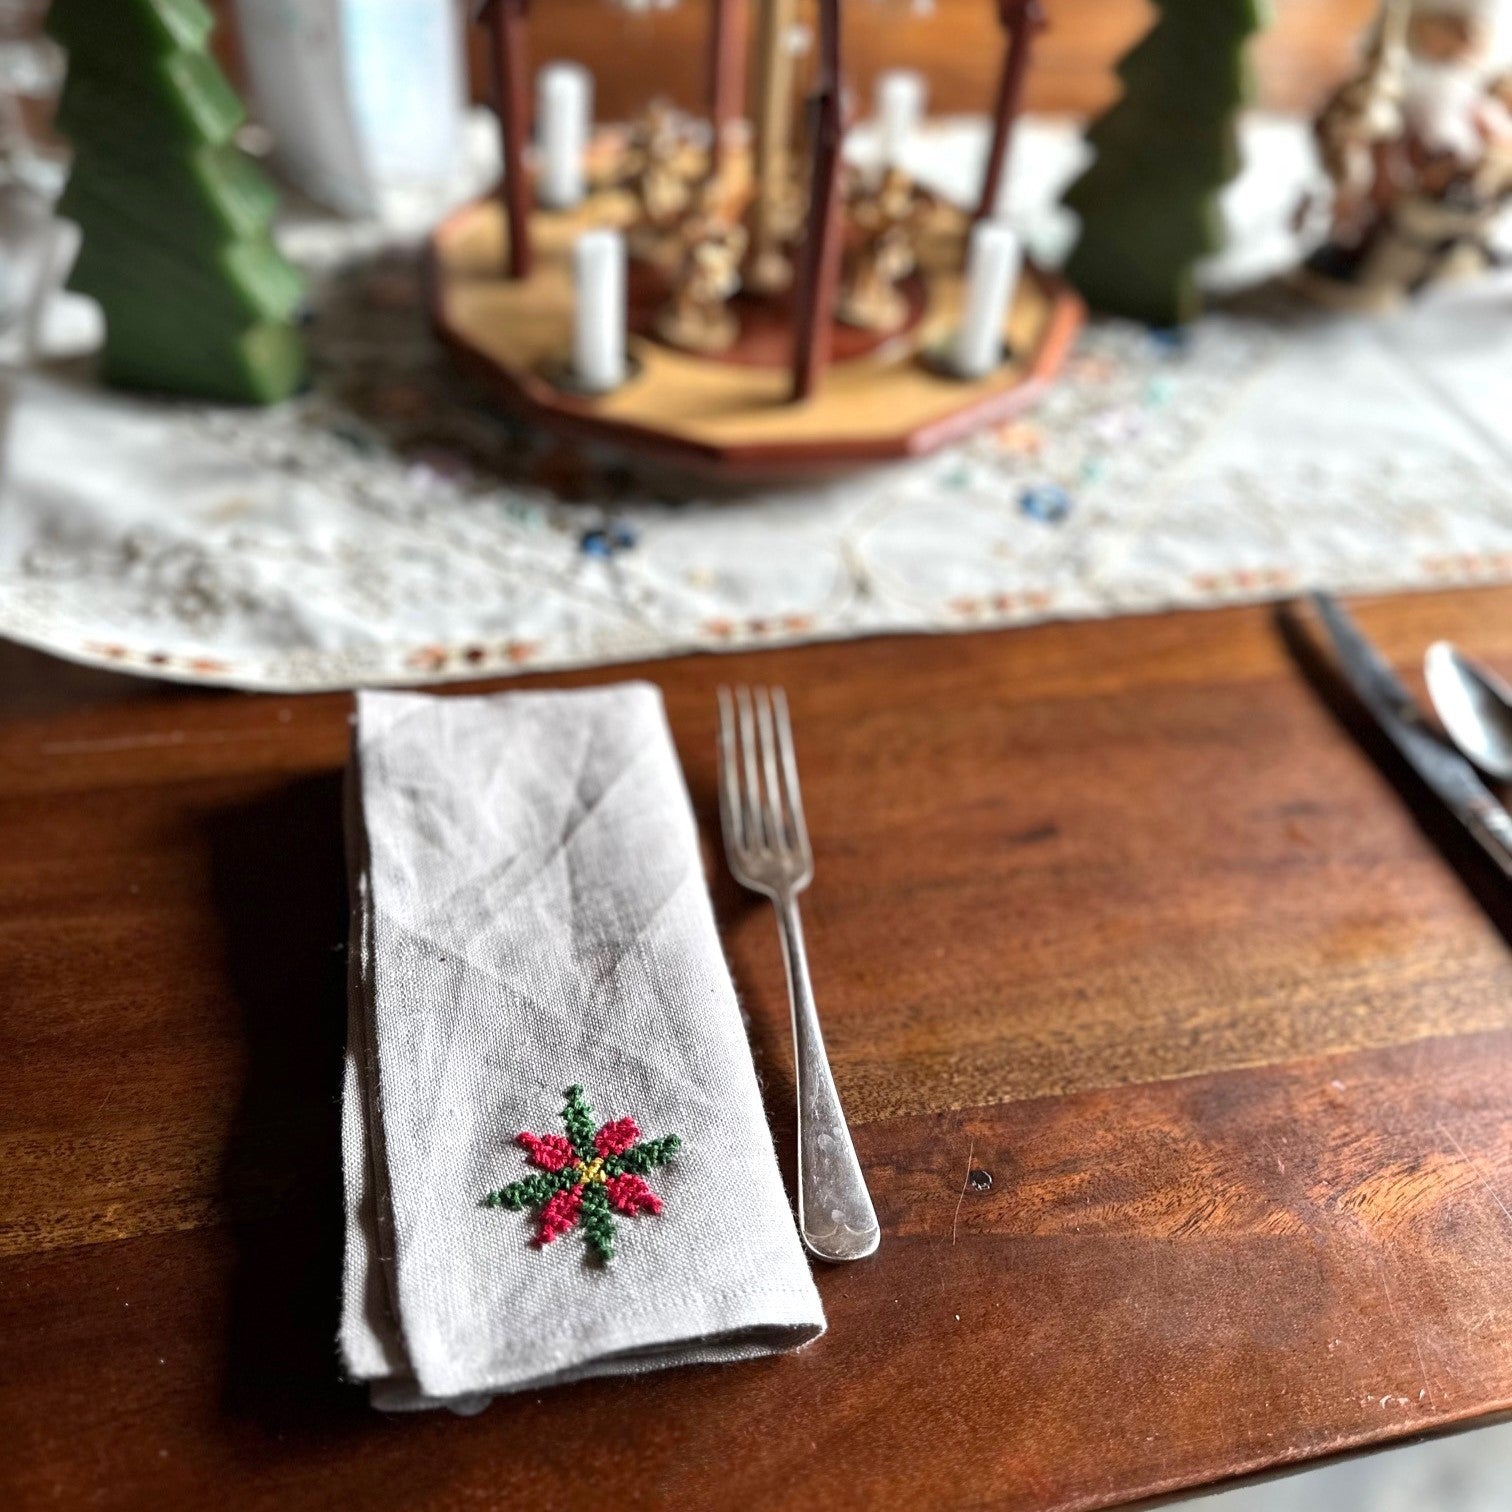 Napkin with a cross stitched poinsetta on a wooden table set with silverware and a table runner.